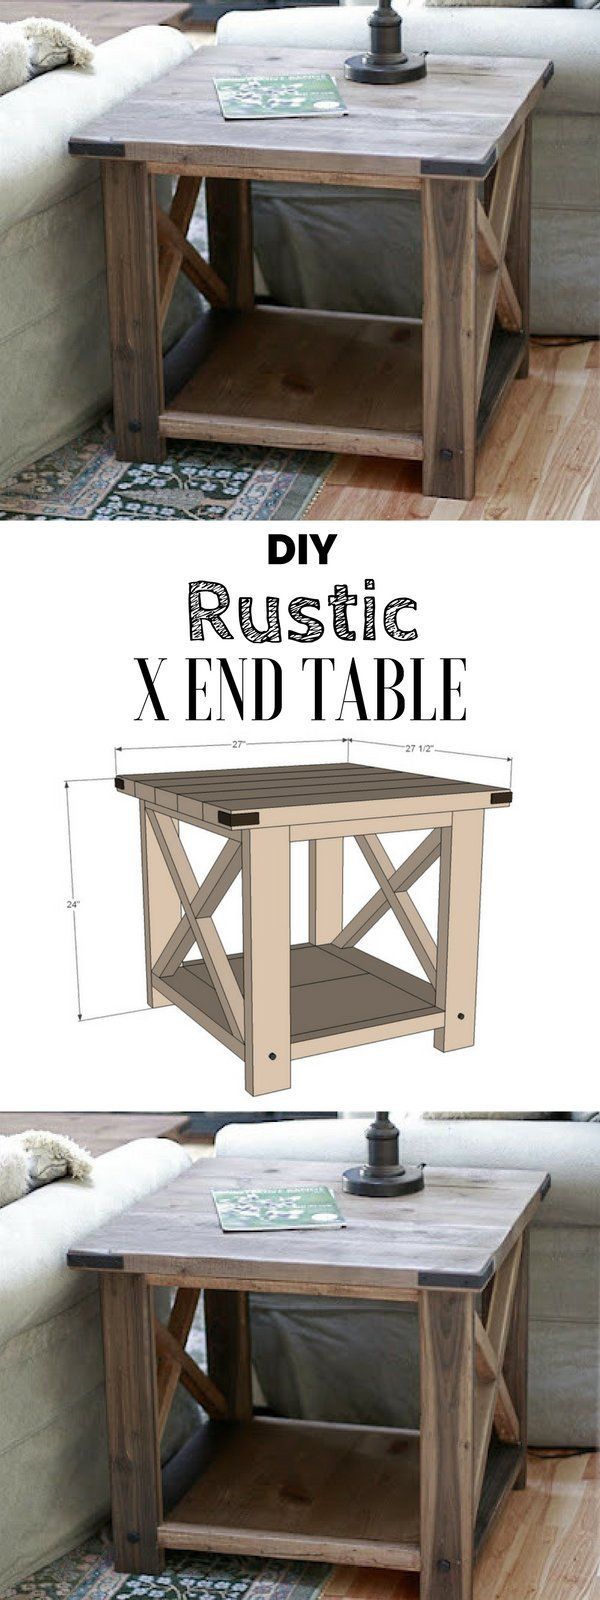 Check out the tutorial for an easy rustic DIY end table @Industry Standard Design